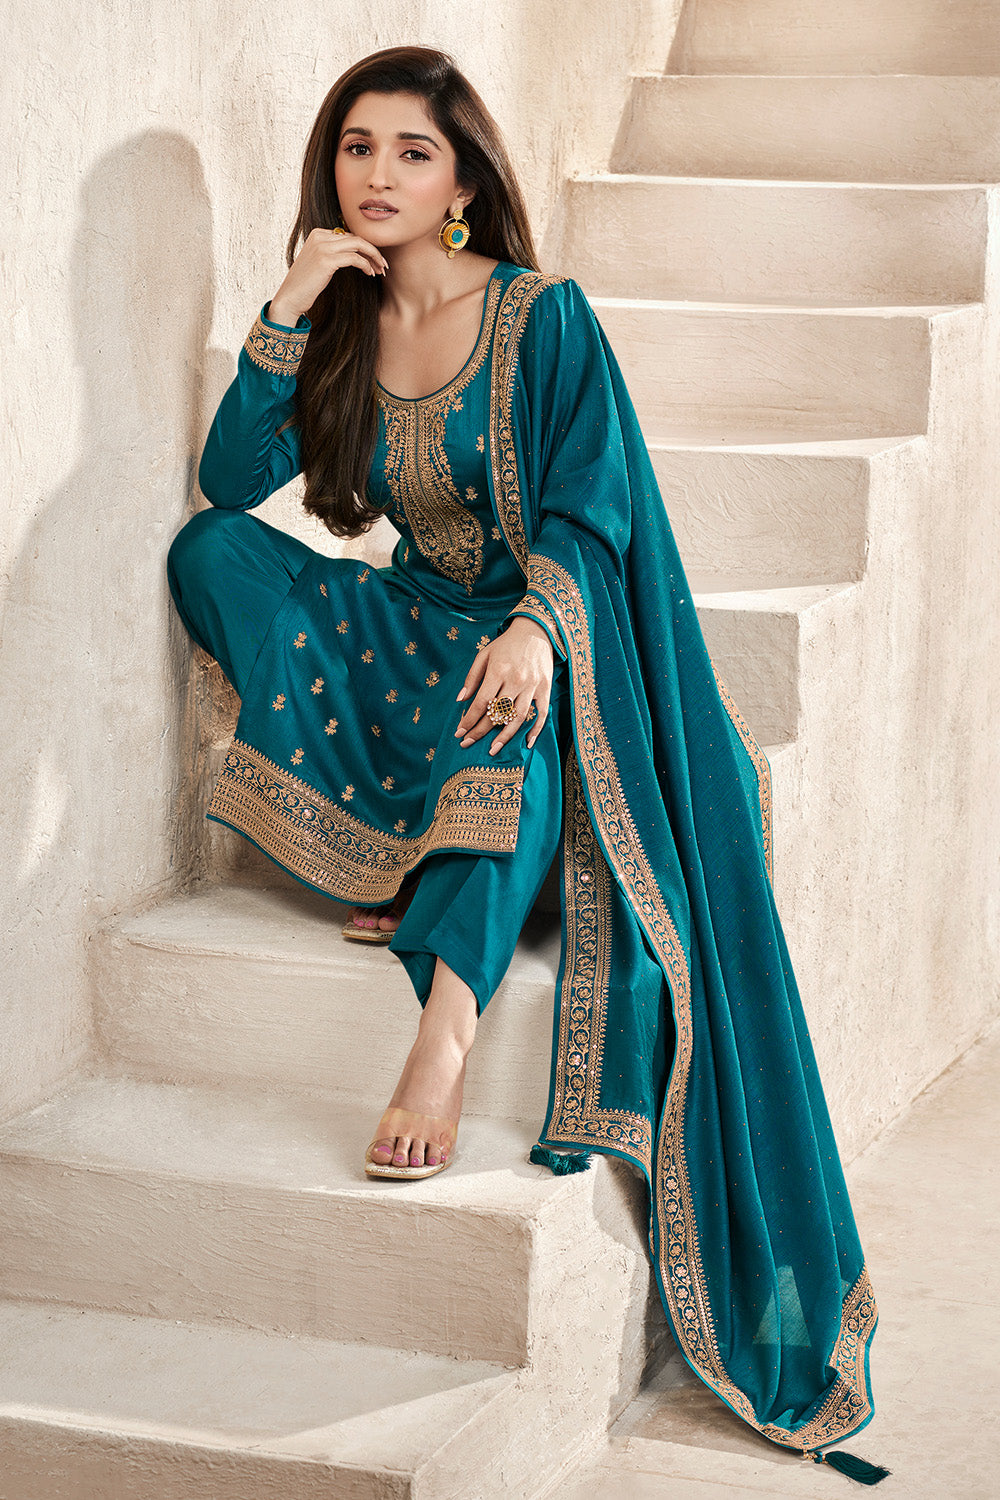 Teal Colour Zari Embroidered Silk Unstitched Suit Material